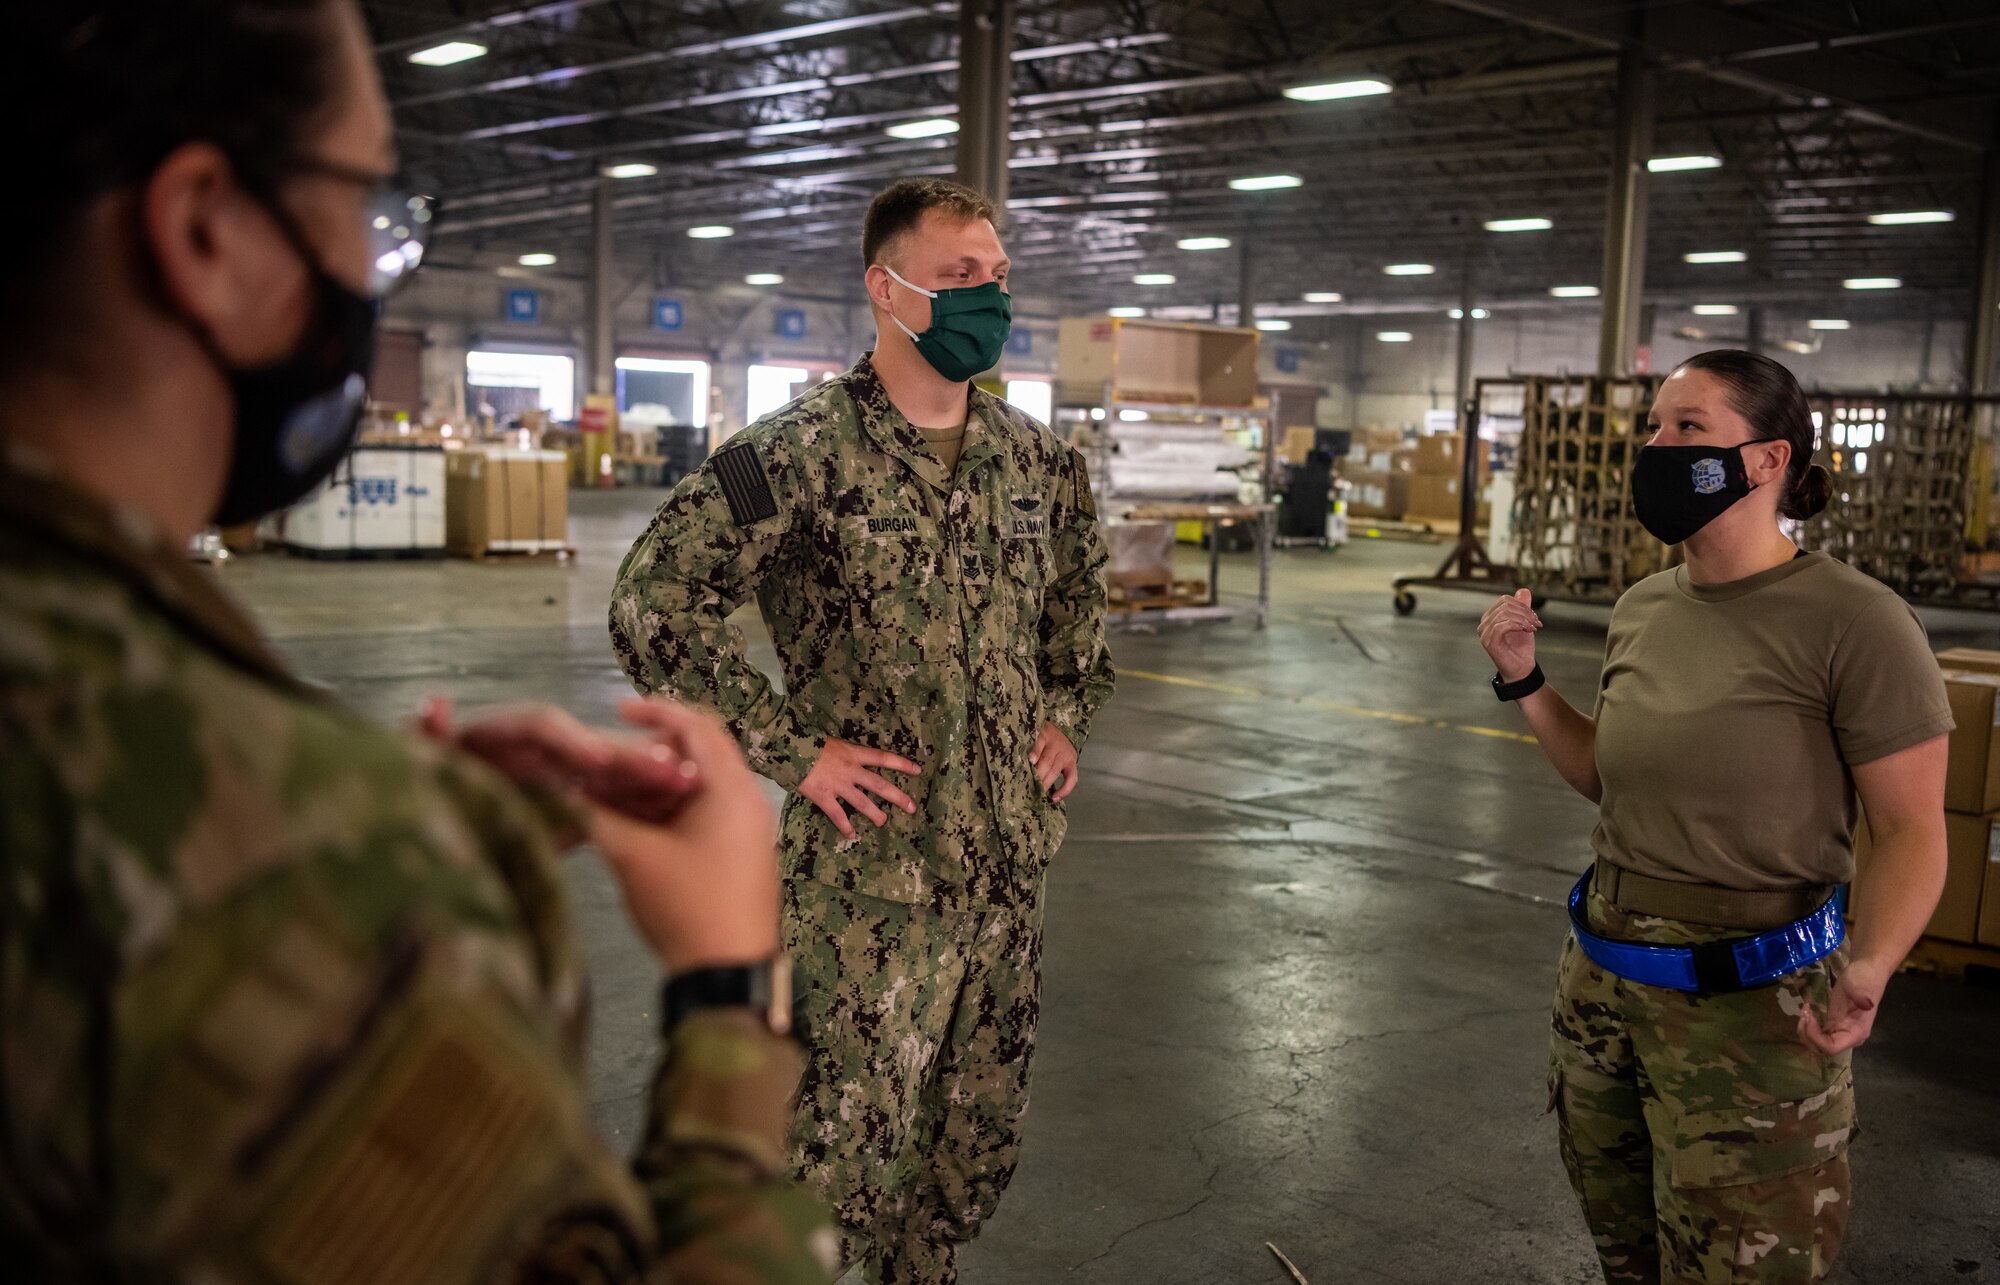 A Navy service member talks with Air Force members inside a large warehouse full of boxes.